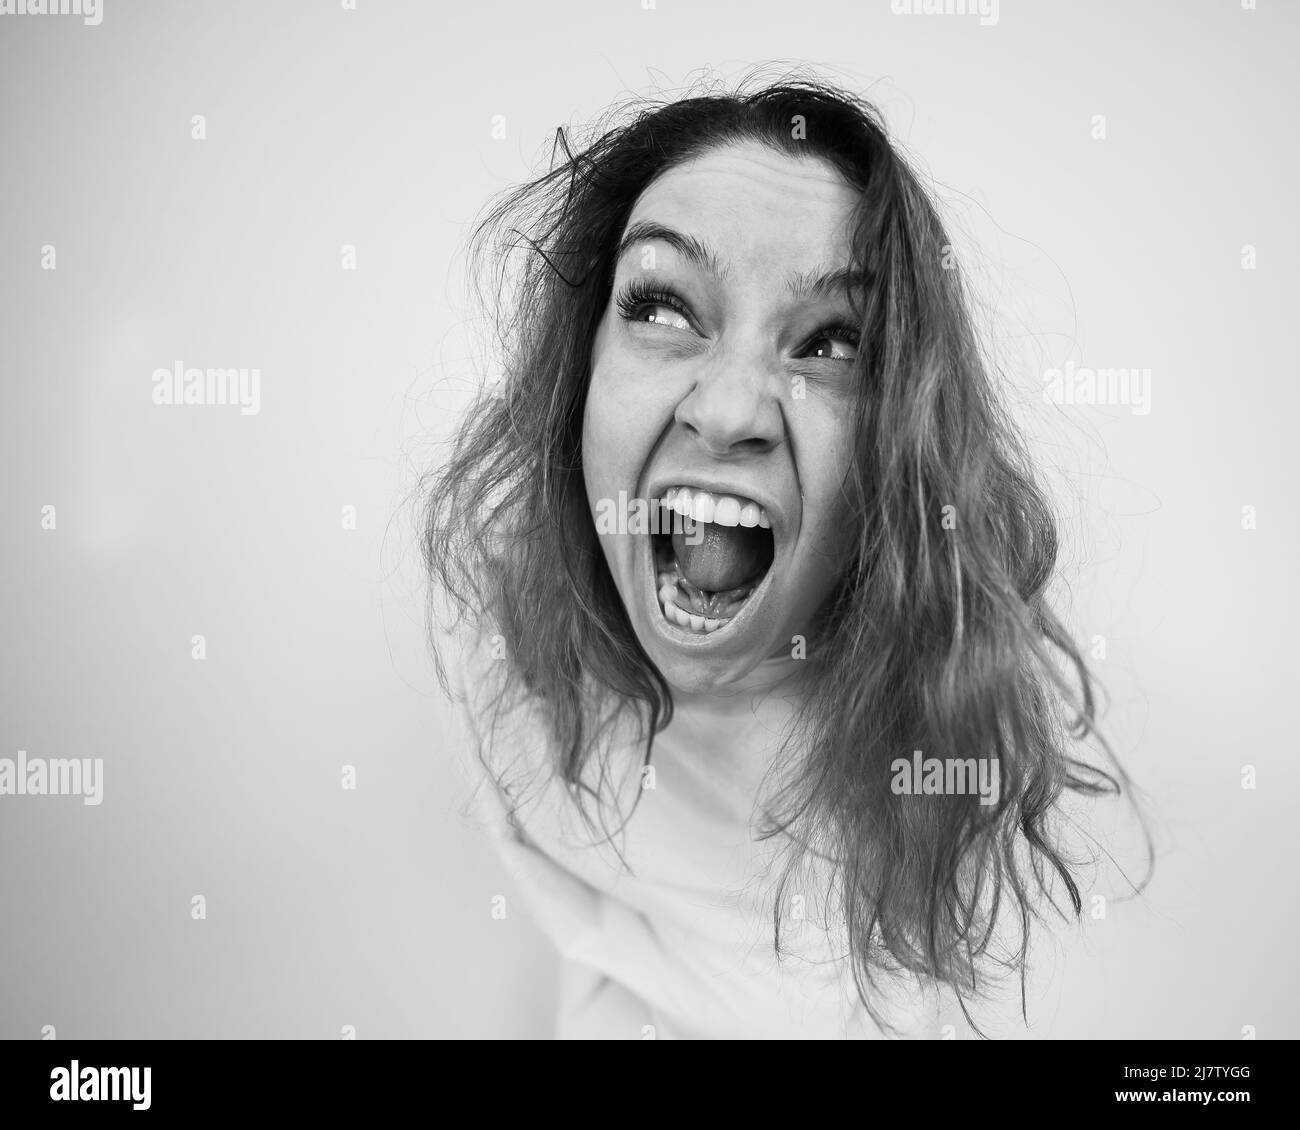 Close-up portrait of insane woman in straitjacket on white background. Monochrome. Stock Photo